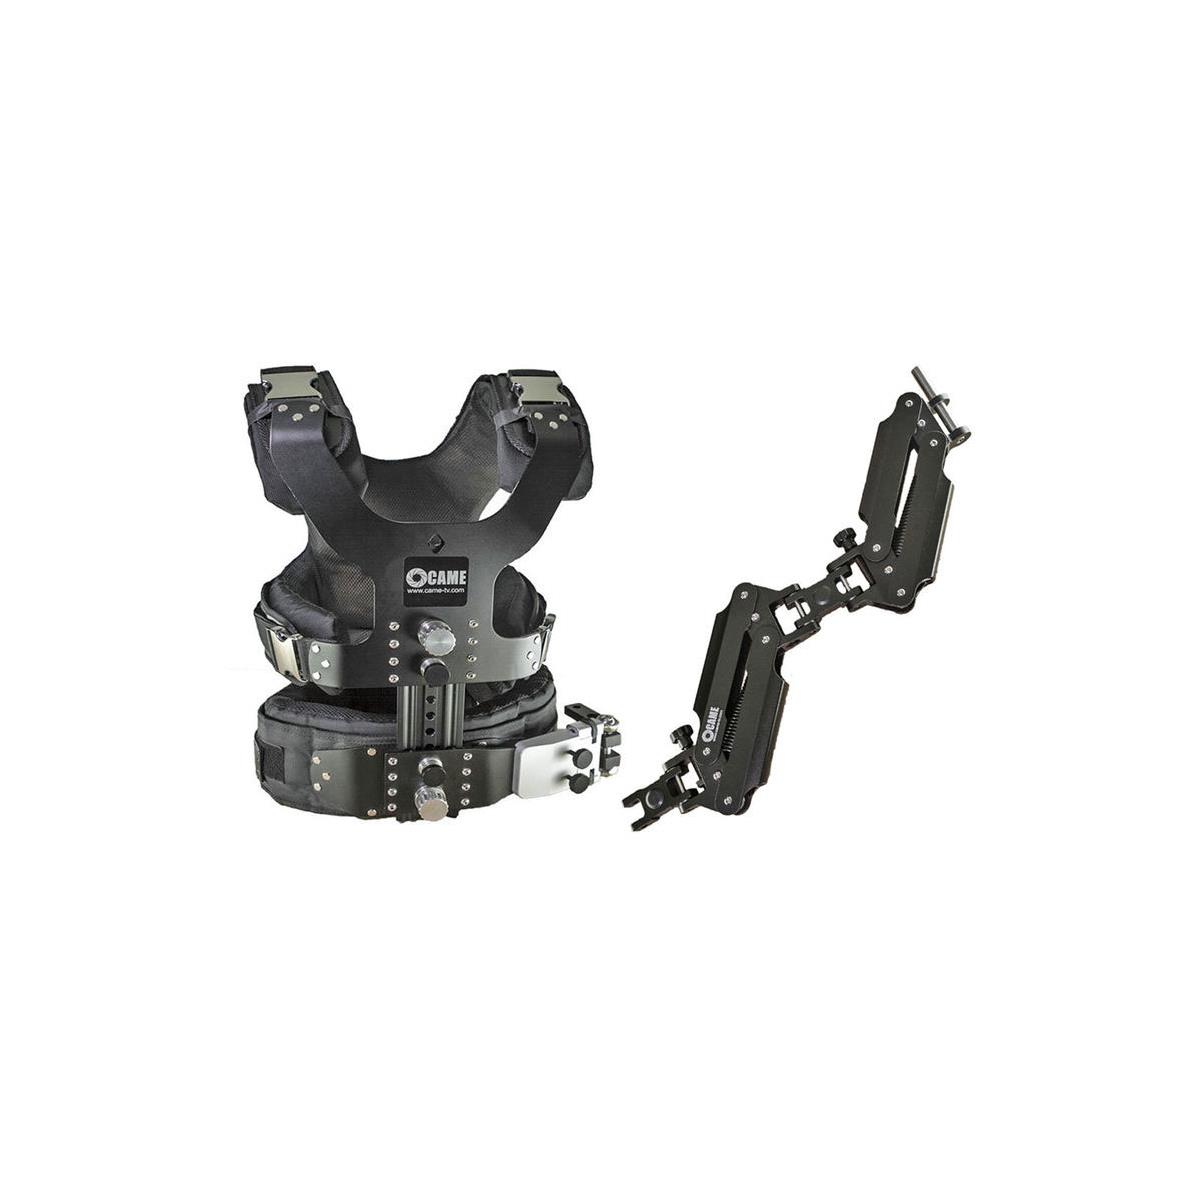 Image of Came-TV Support Vest with Dual Arm for 5.5-33lbs Pro Camera Steadicam Stabilizer